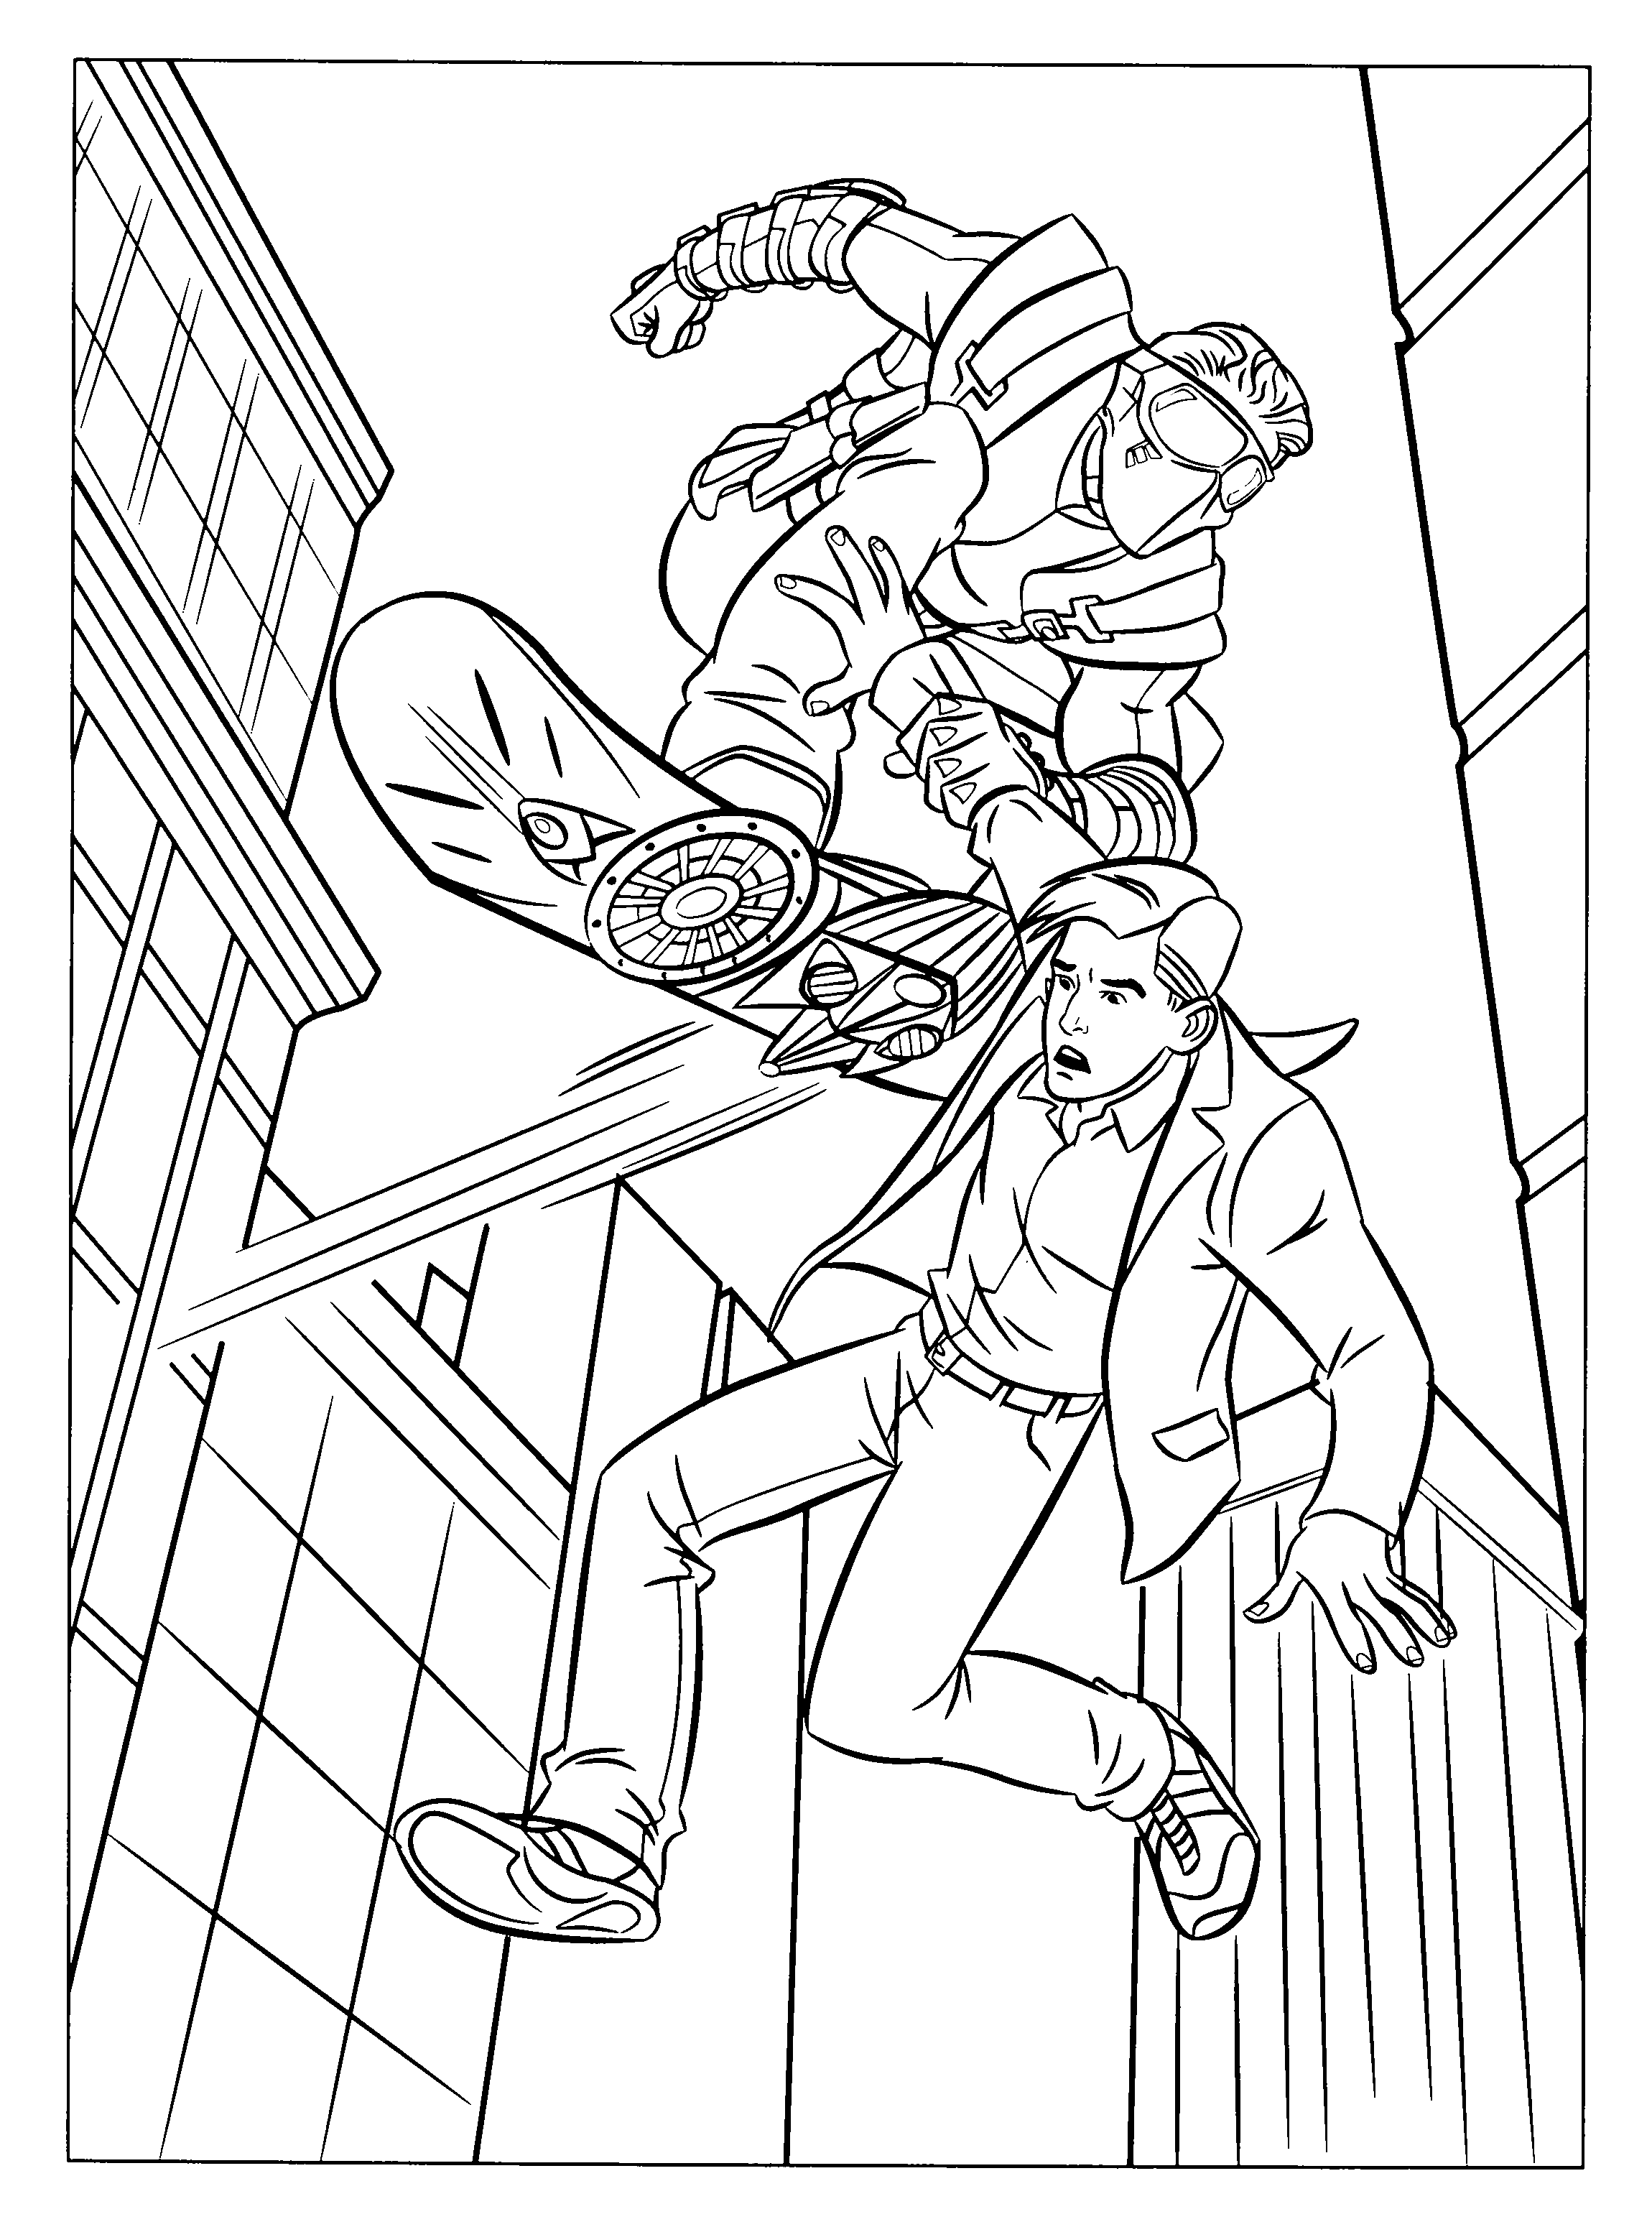 Spiderman Coloring pages | Kids coloring pages | Free coloring pages | #38